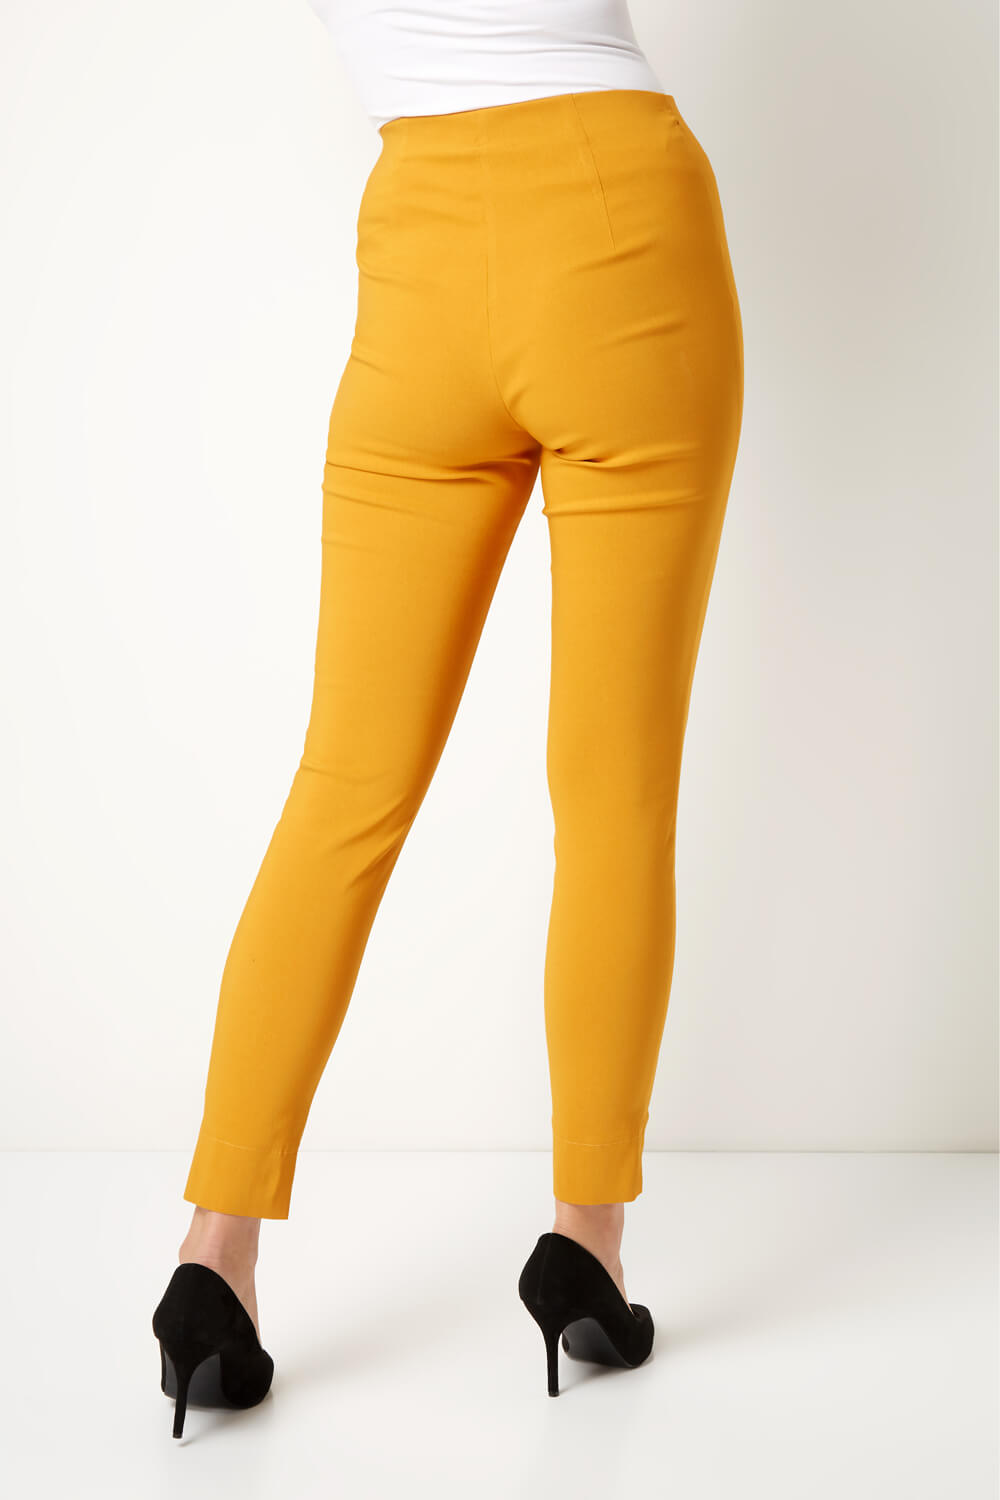 Amber Full Length Stretch Trousers, Image 2 of 4